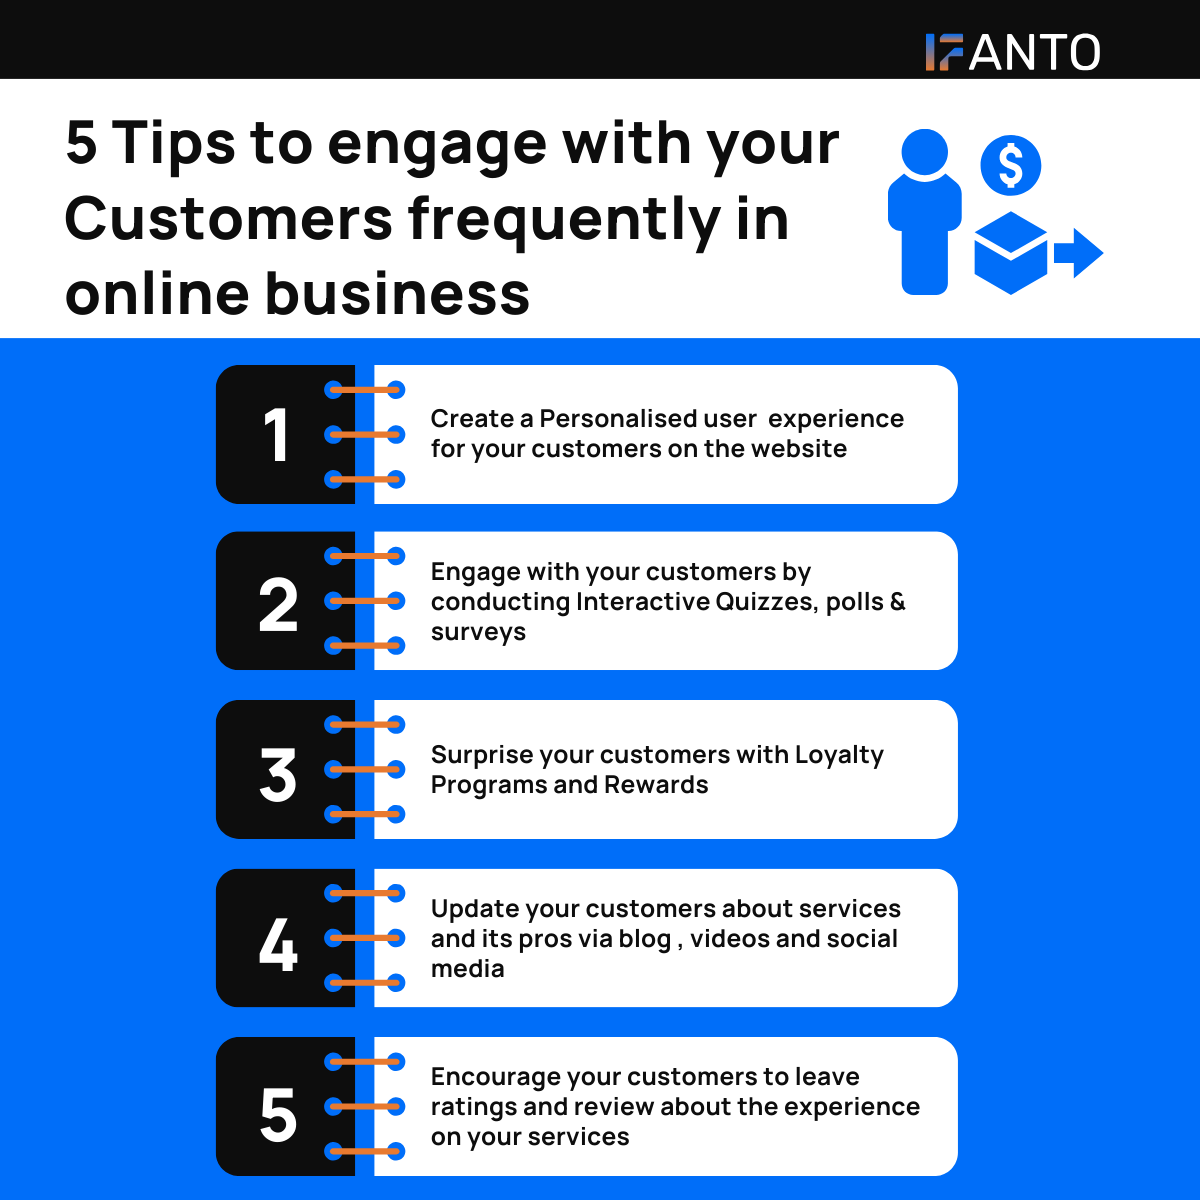 Are you wondering how to interact with your customers? We have tips for that.🚀🚀🚀

#ecommercesolutions ,#bussinessowner,#ecommercemarketing,#ecommercetips,#fanto